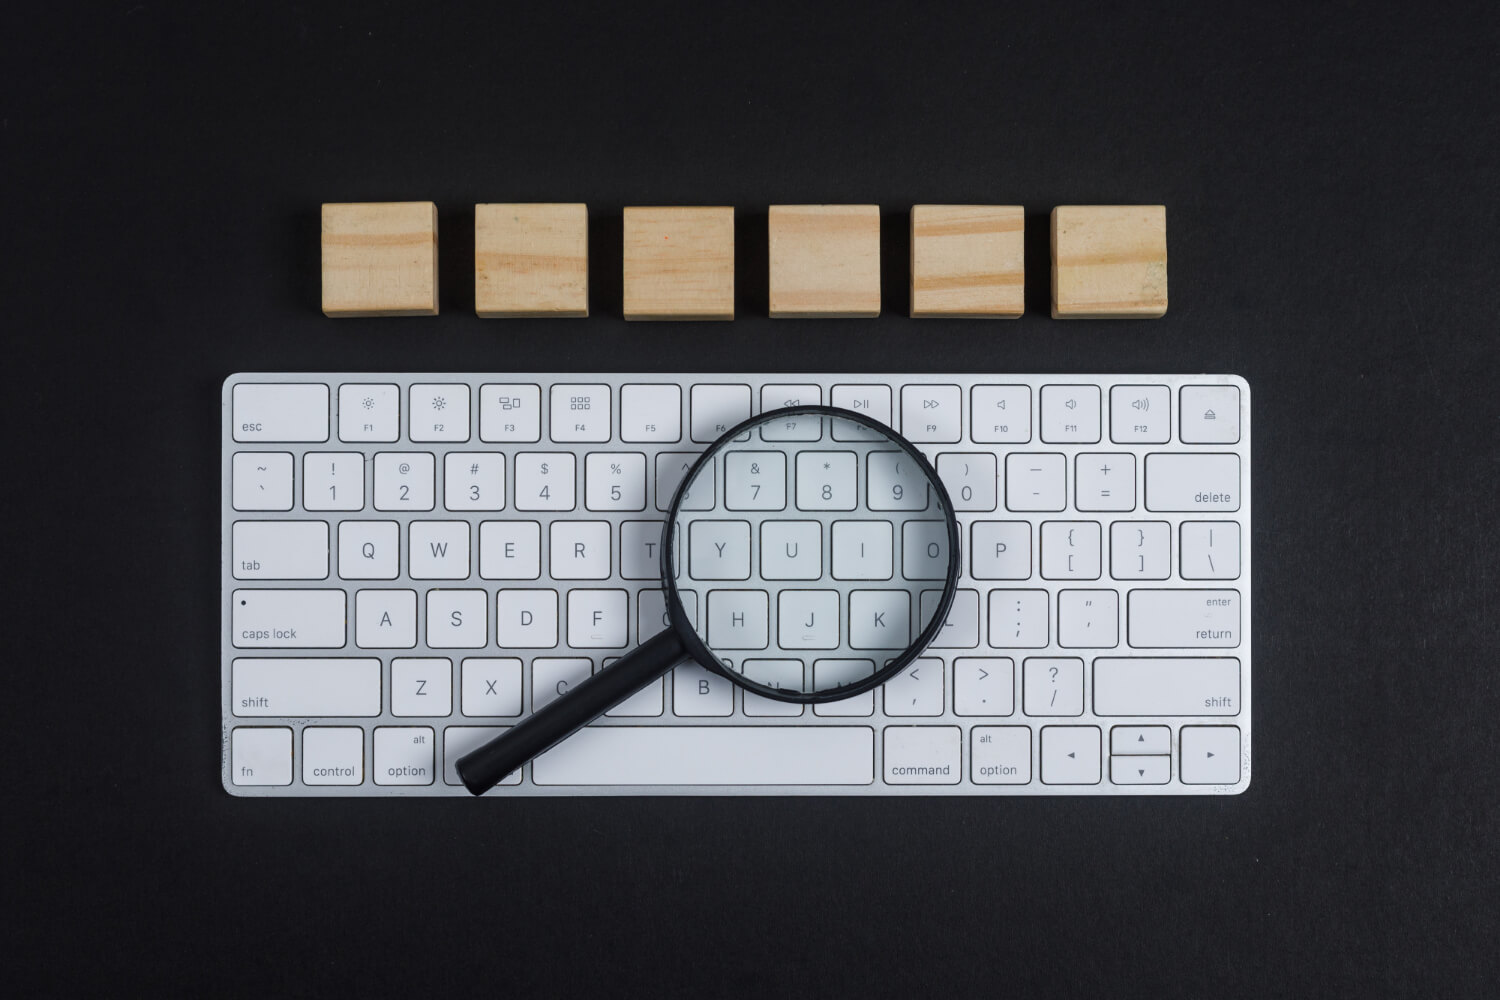 conceptual-research-with-keyboard-magnifier-wooden-cubes-black-desk-background-flat-lay-horizontal-image